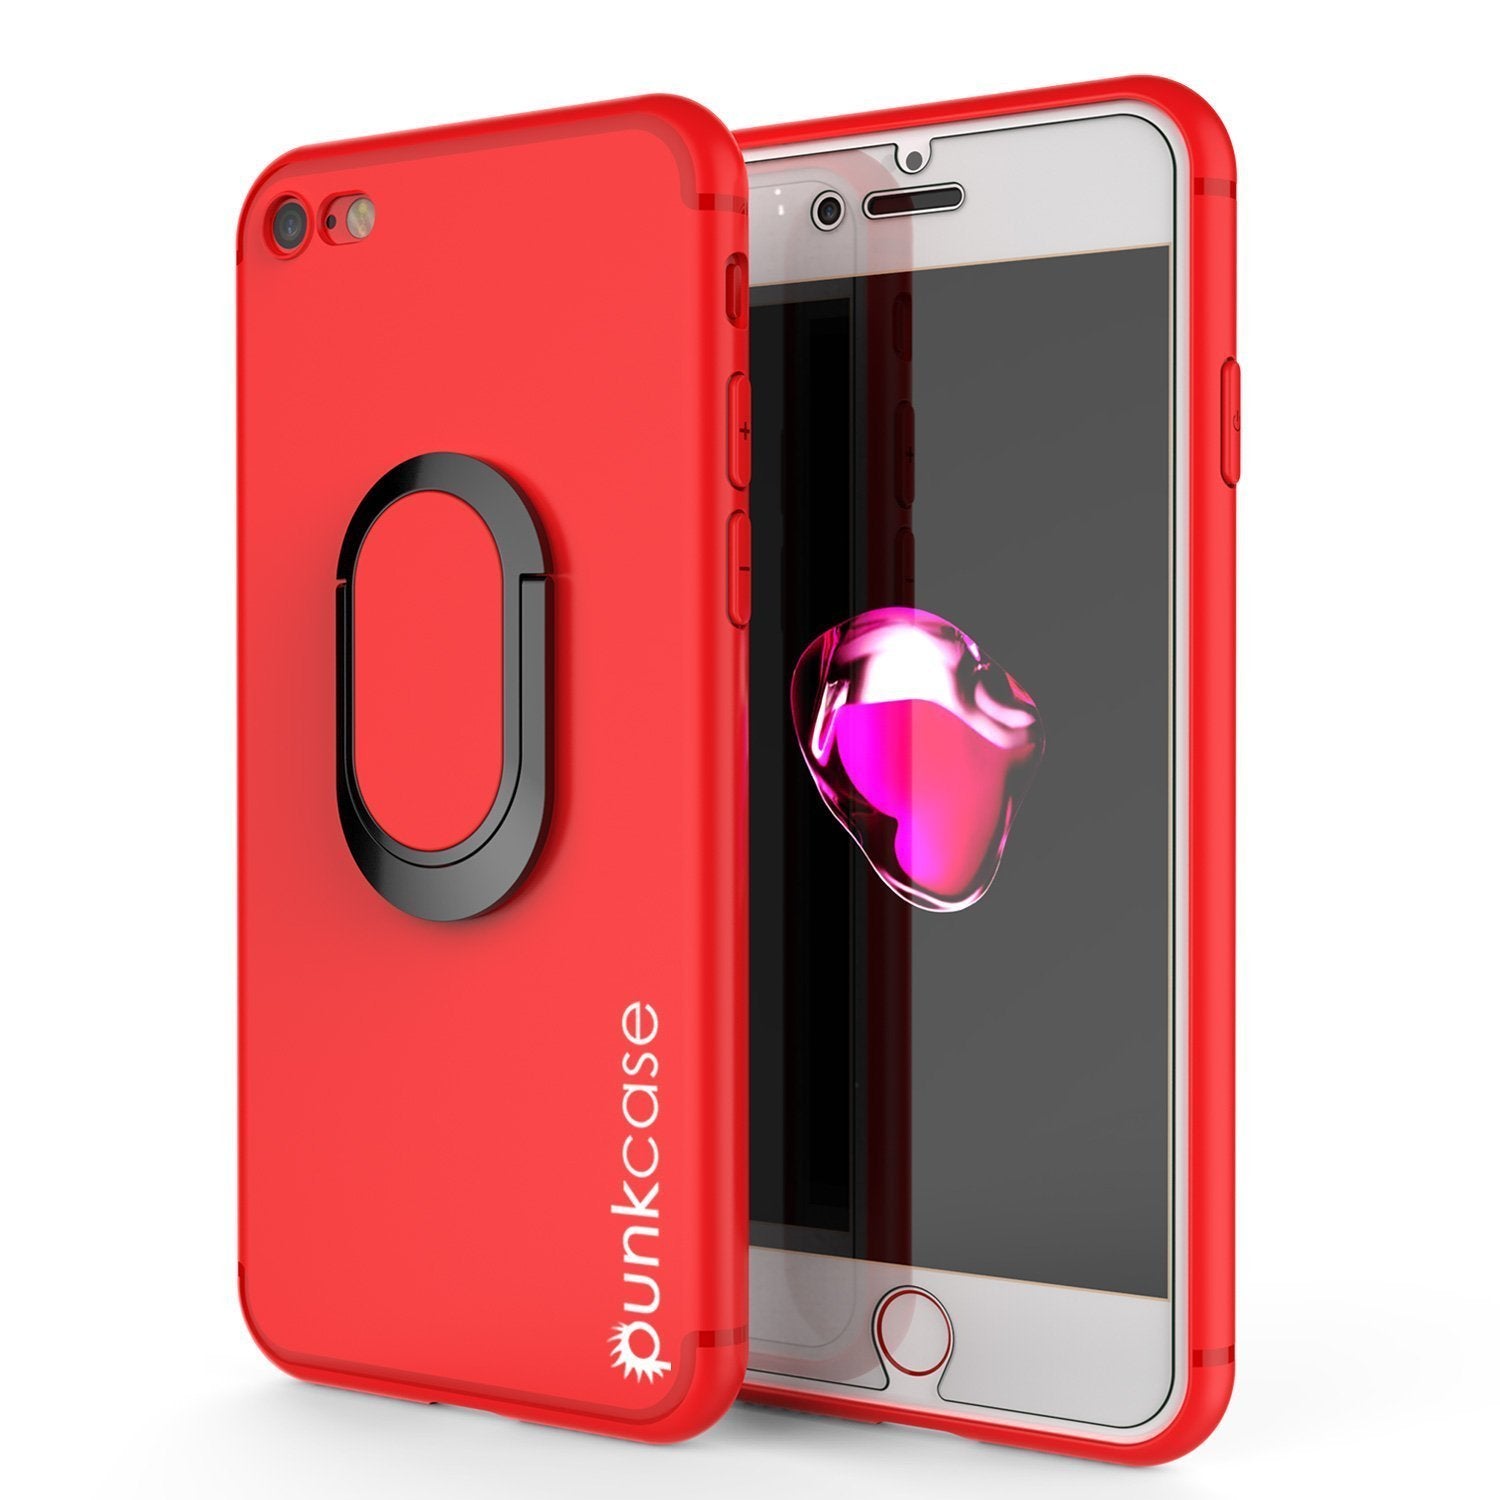 iPhone SE (4.7") Case, Punkcase Magnetix Protective TPU Cover W/ Kickstand, Tempered Glass Screen Protector [Red] (Color in image: red)